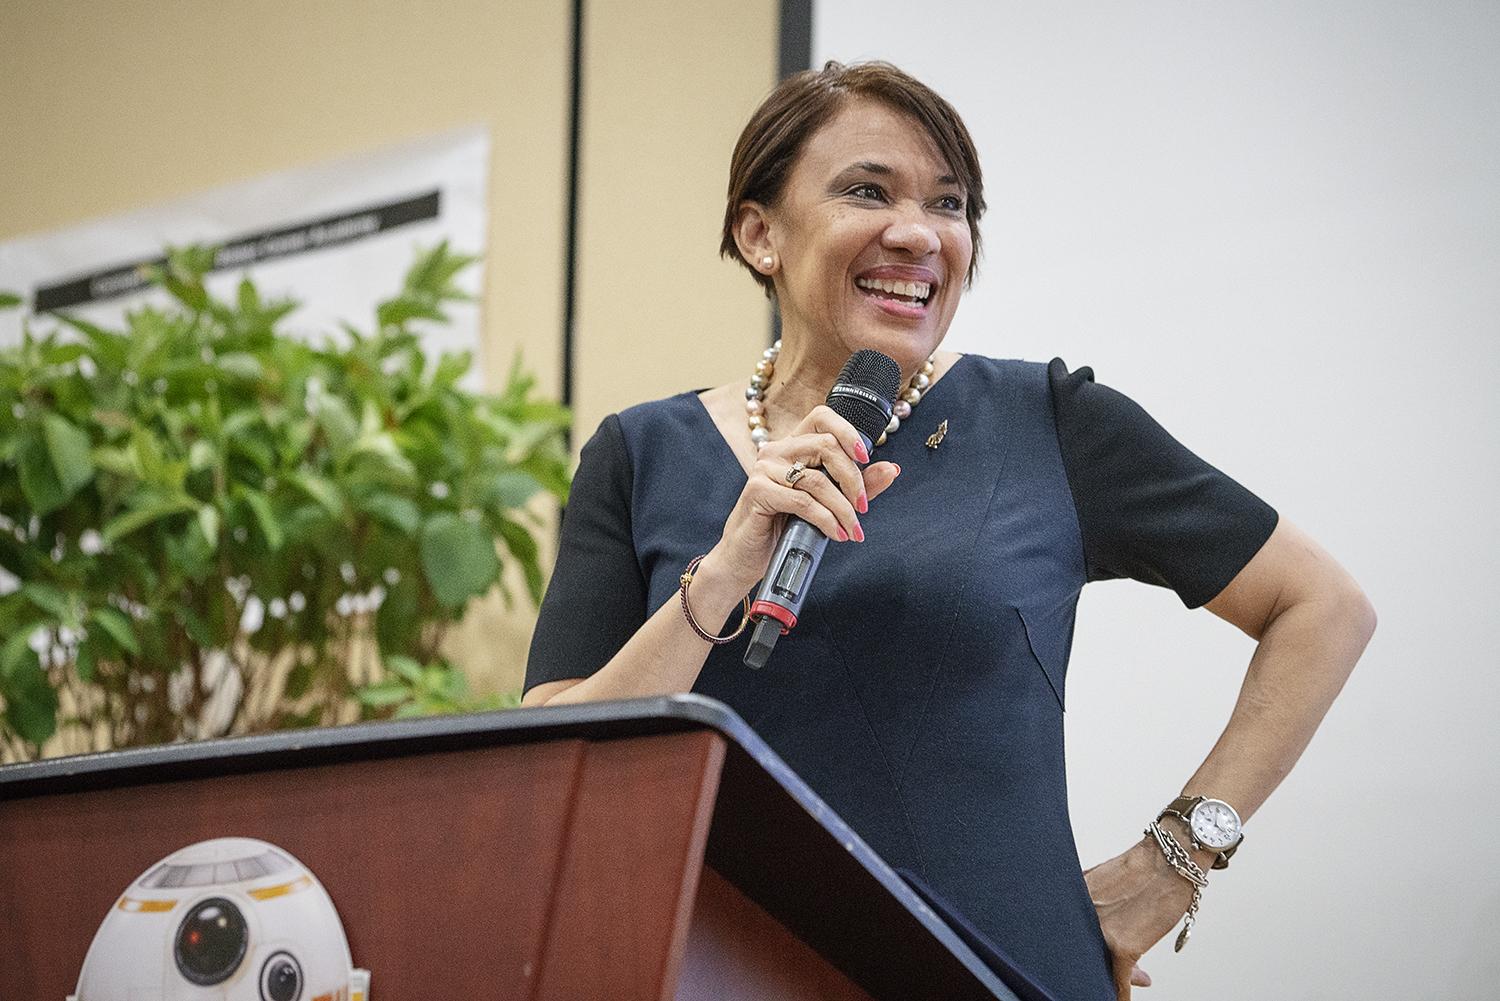 Flint, MI - Friday, May 4, 2018: Flint City Mayor Karen Weaver speaks to the Blueberry Ambassadors, teachers, parents and mentors during the 5th Annual Blueberry Ambassador Awards Party at the Riverfront Banquet Center downtown.